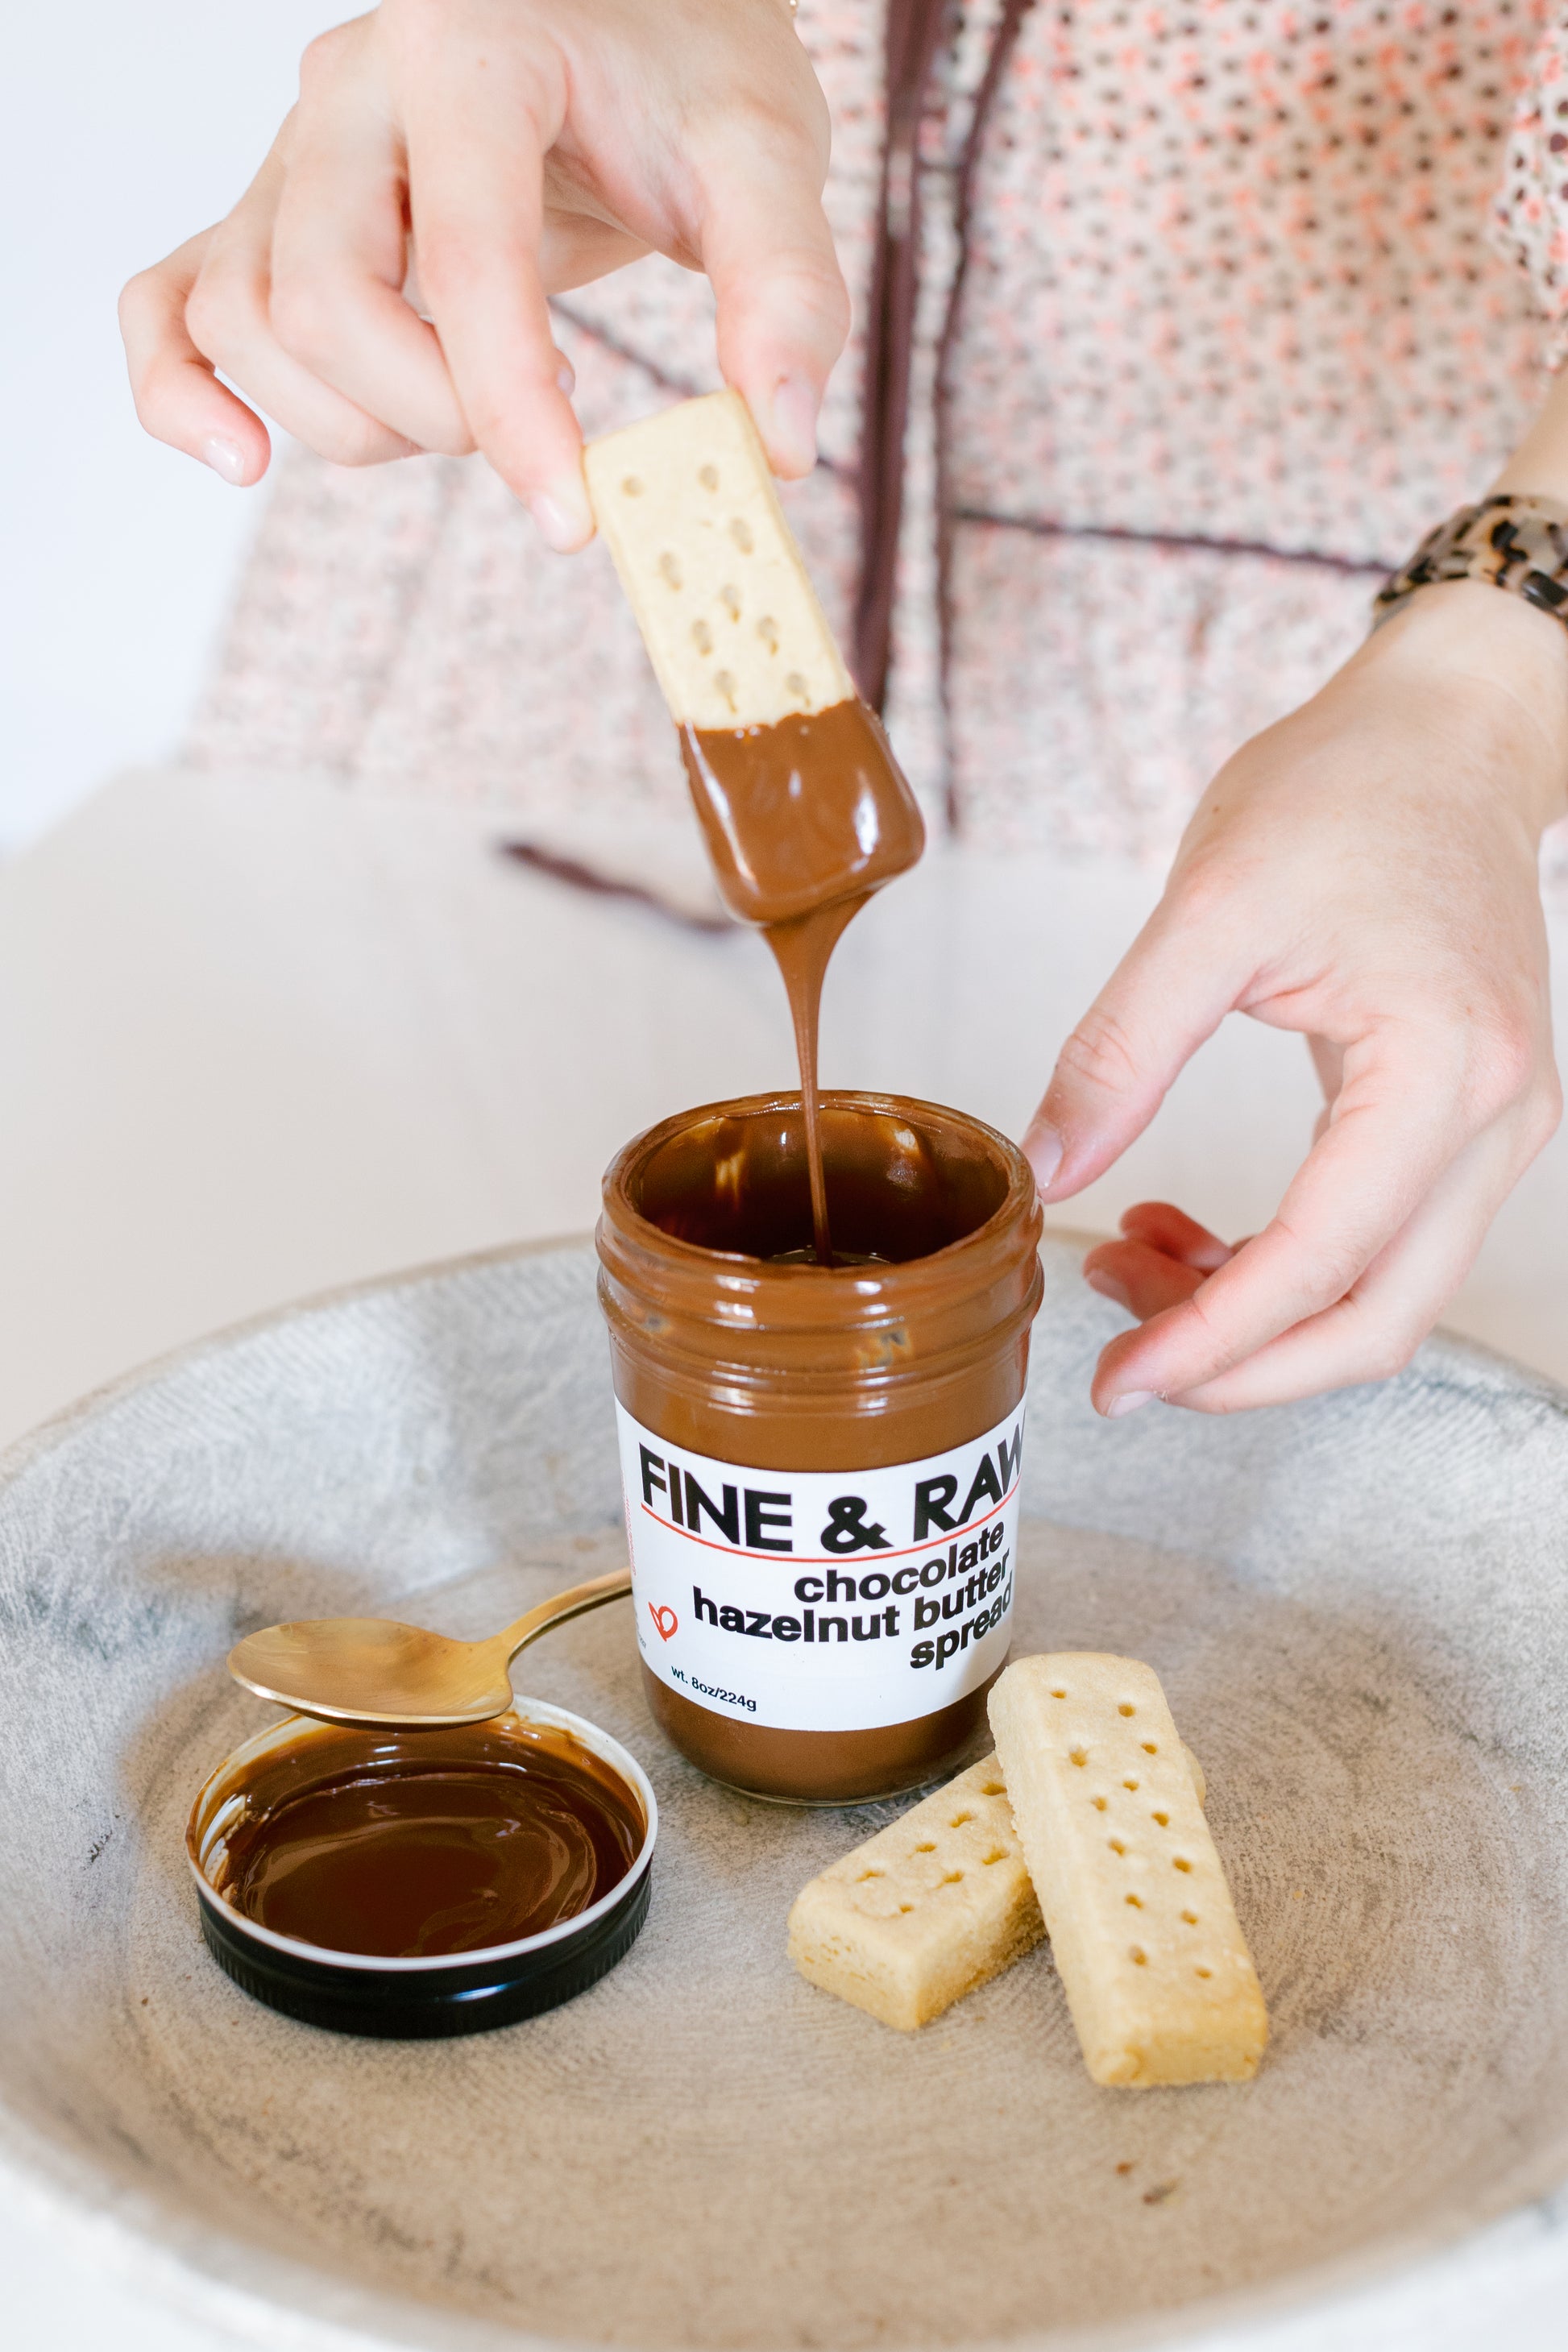 picture of a hand putting a biscuit inside the chocolate hazenlnut butter spread package